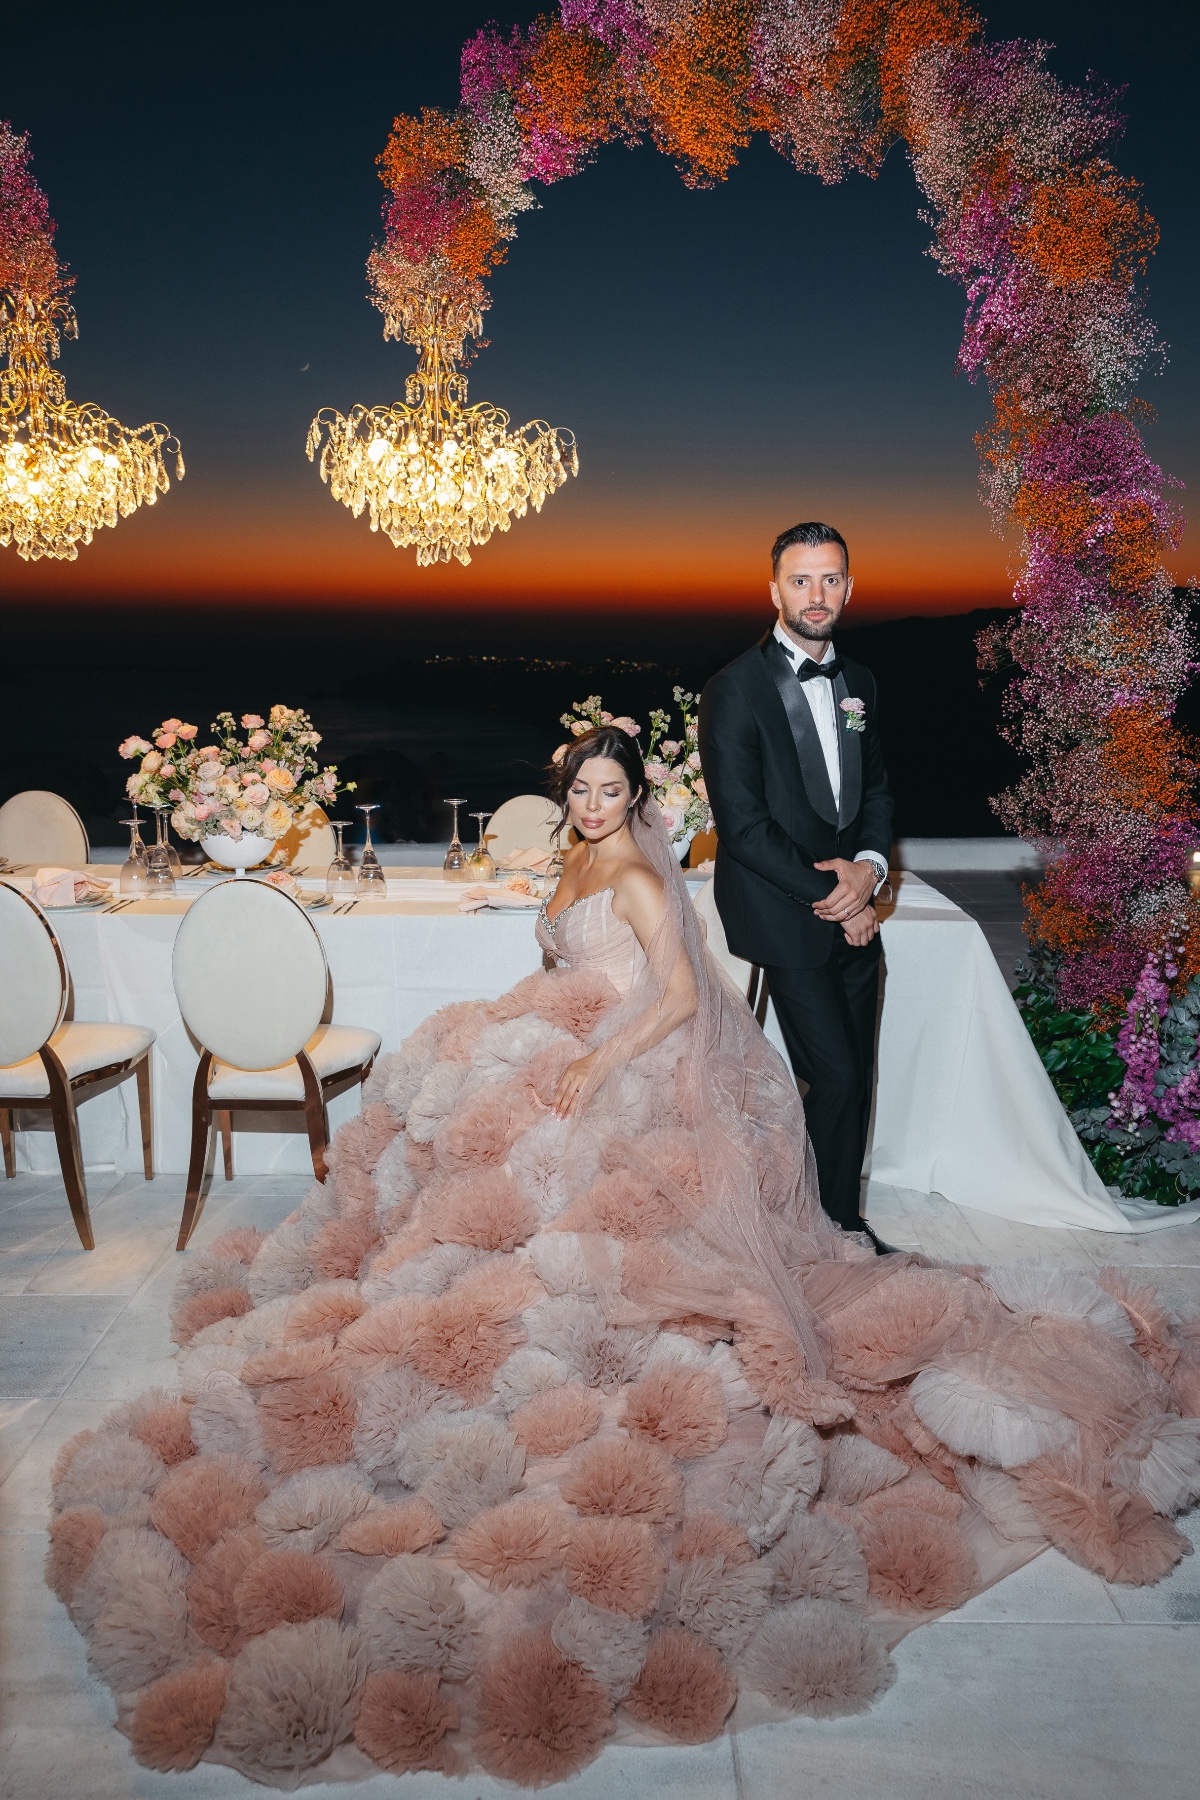 Couture bride and groom at sunset reception 